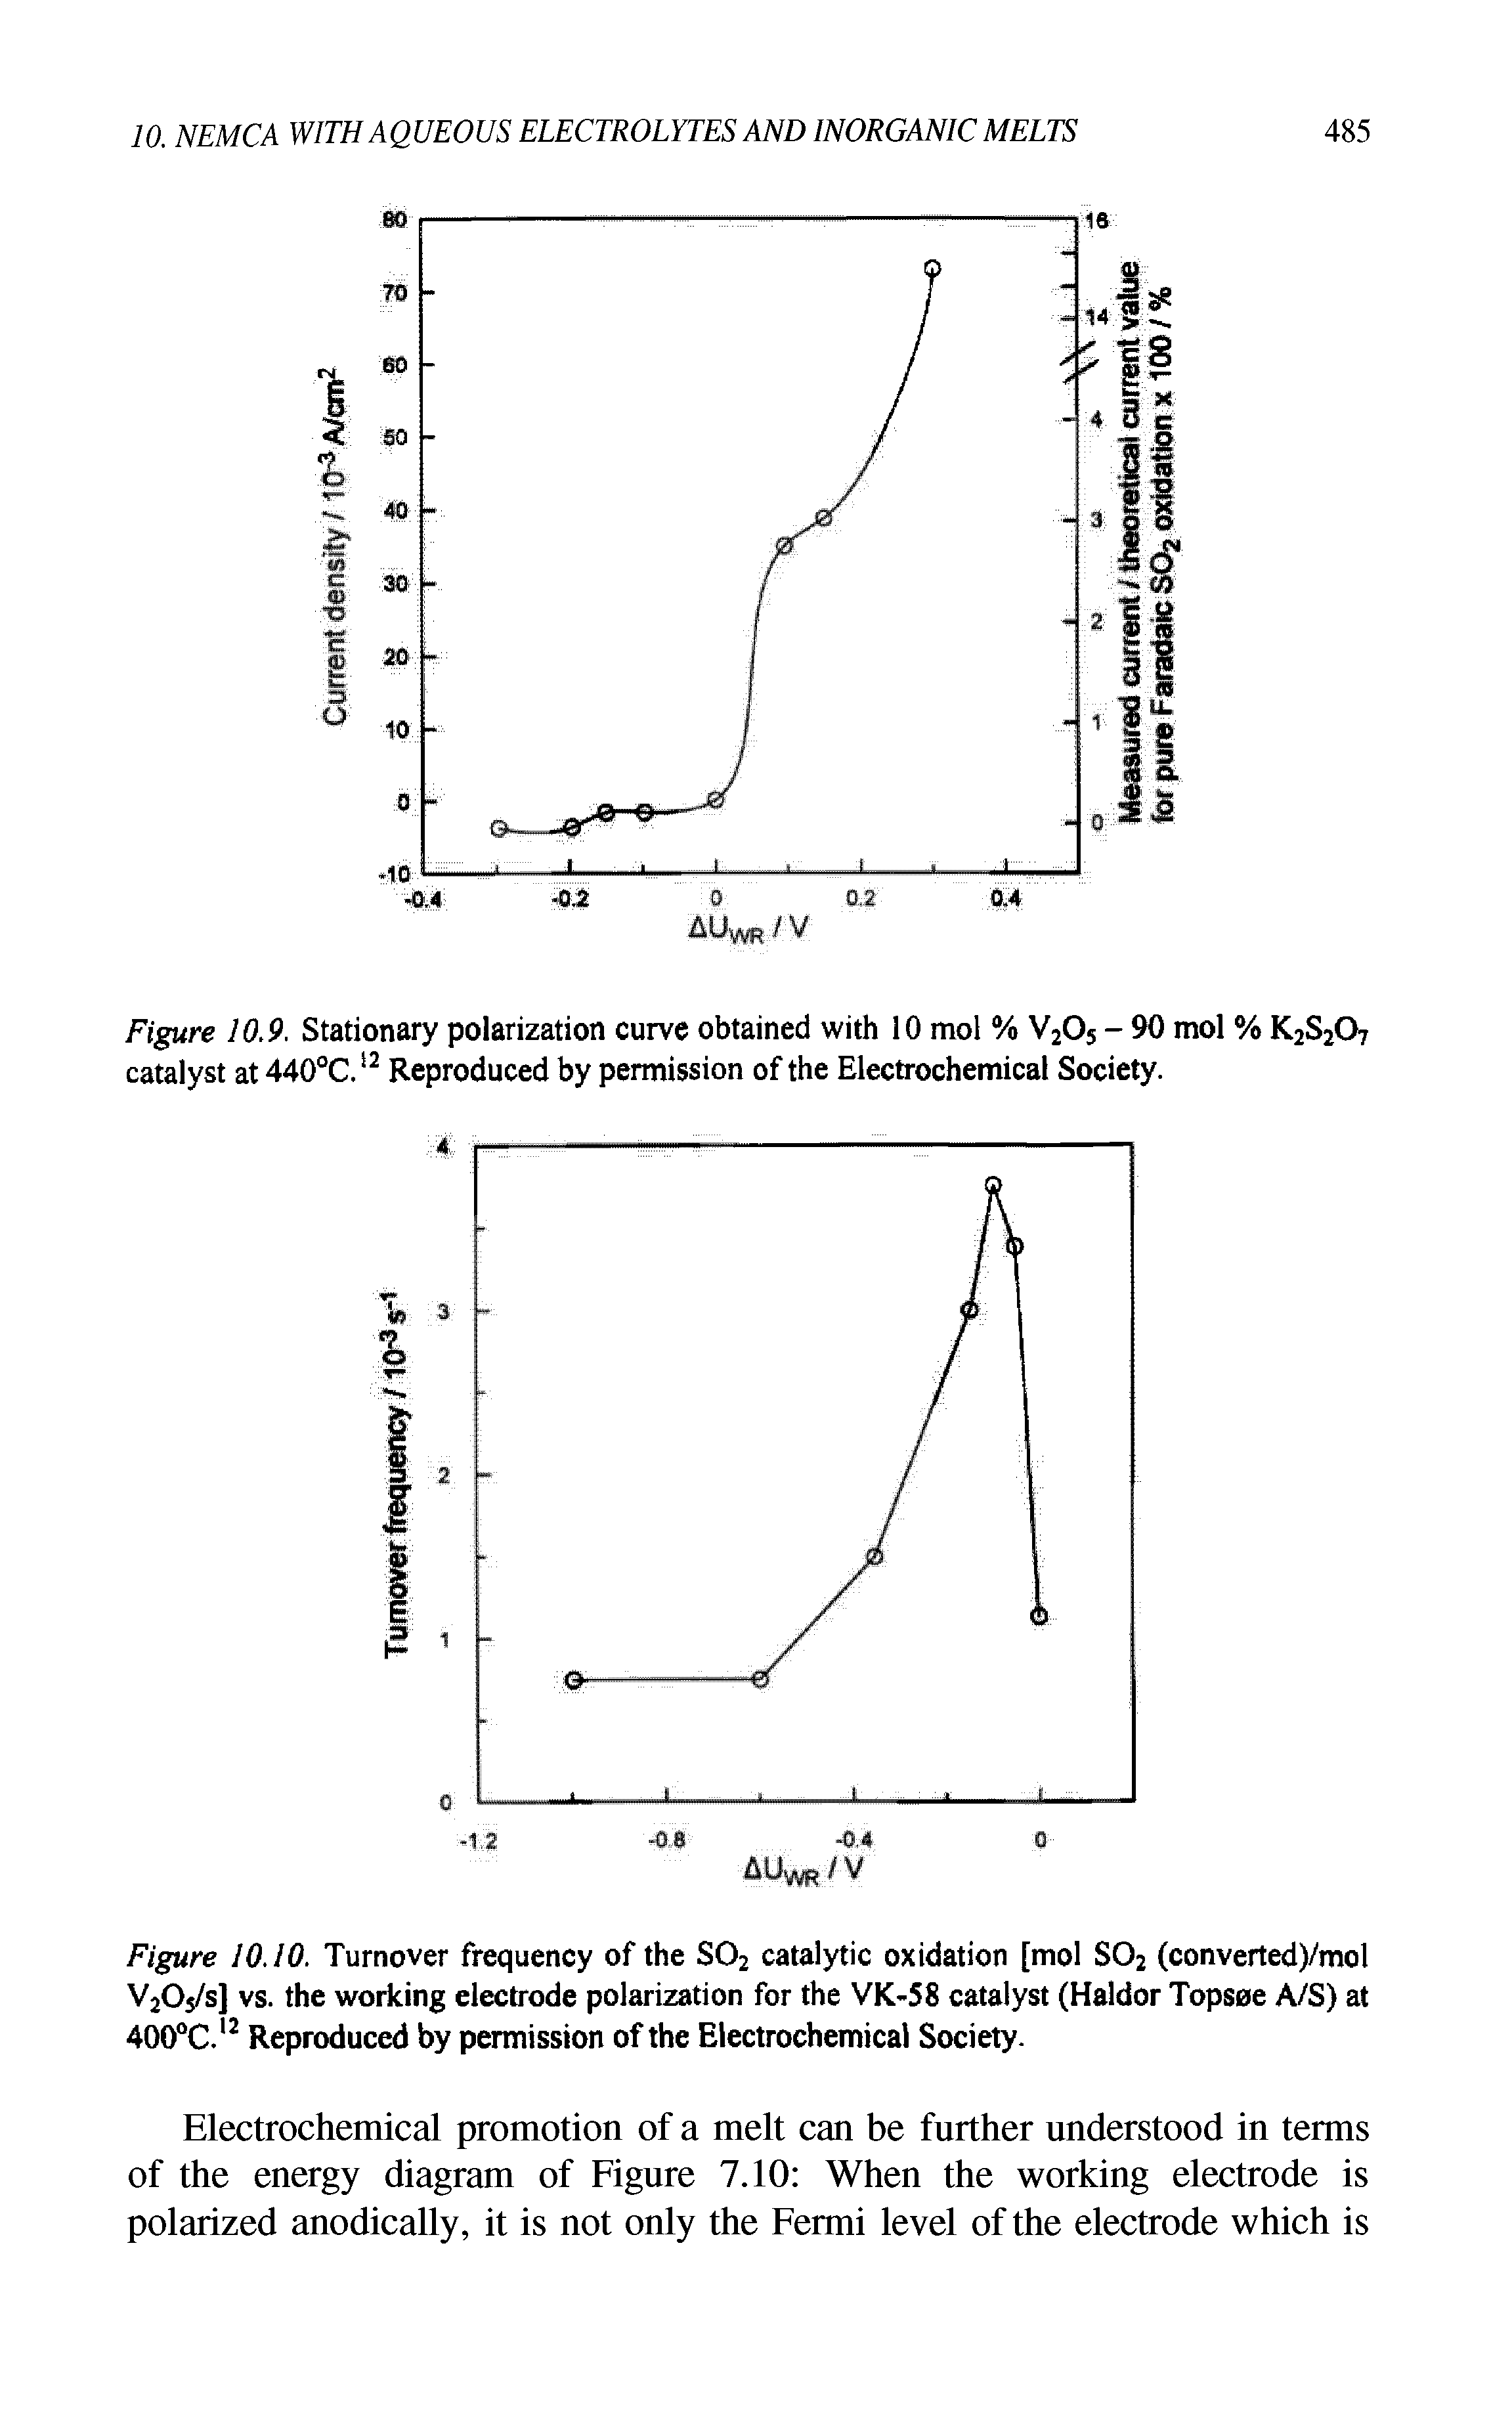 Figure 10.10. Turnover frequency of the S02 catalytic oxidation [mol S02 (converted)/mol V2Os/s] vs. the working electrode polarization for the VK-58 catalyst (Haldor Topsoe A/S) at 400°C.12 Reproduced by permission of the Electrochemical Society.